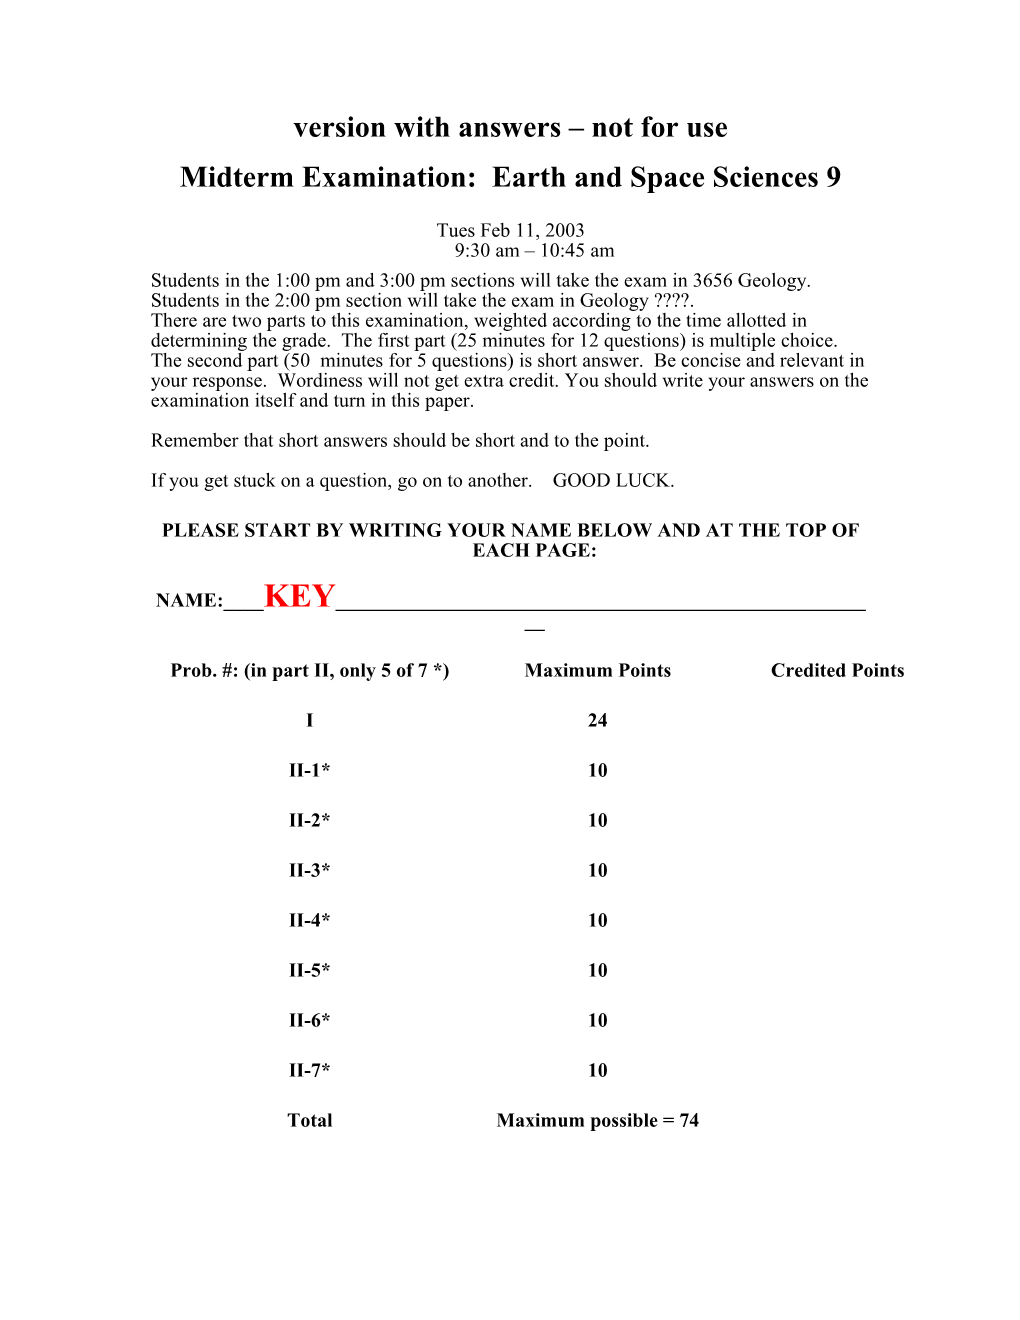 Midterm Examination: Earth and Space Sciences 9